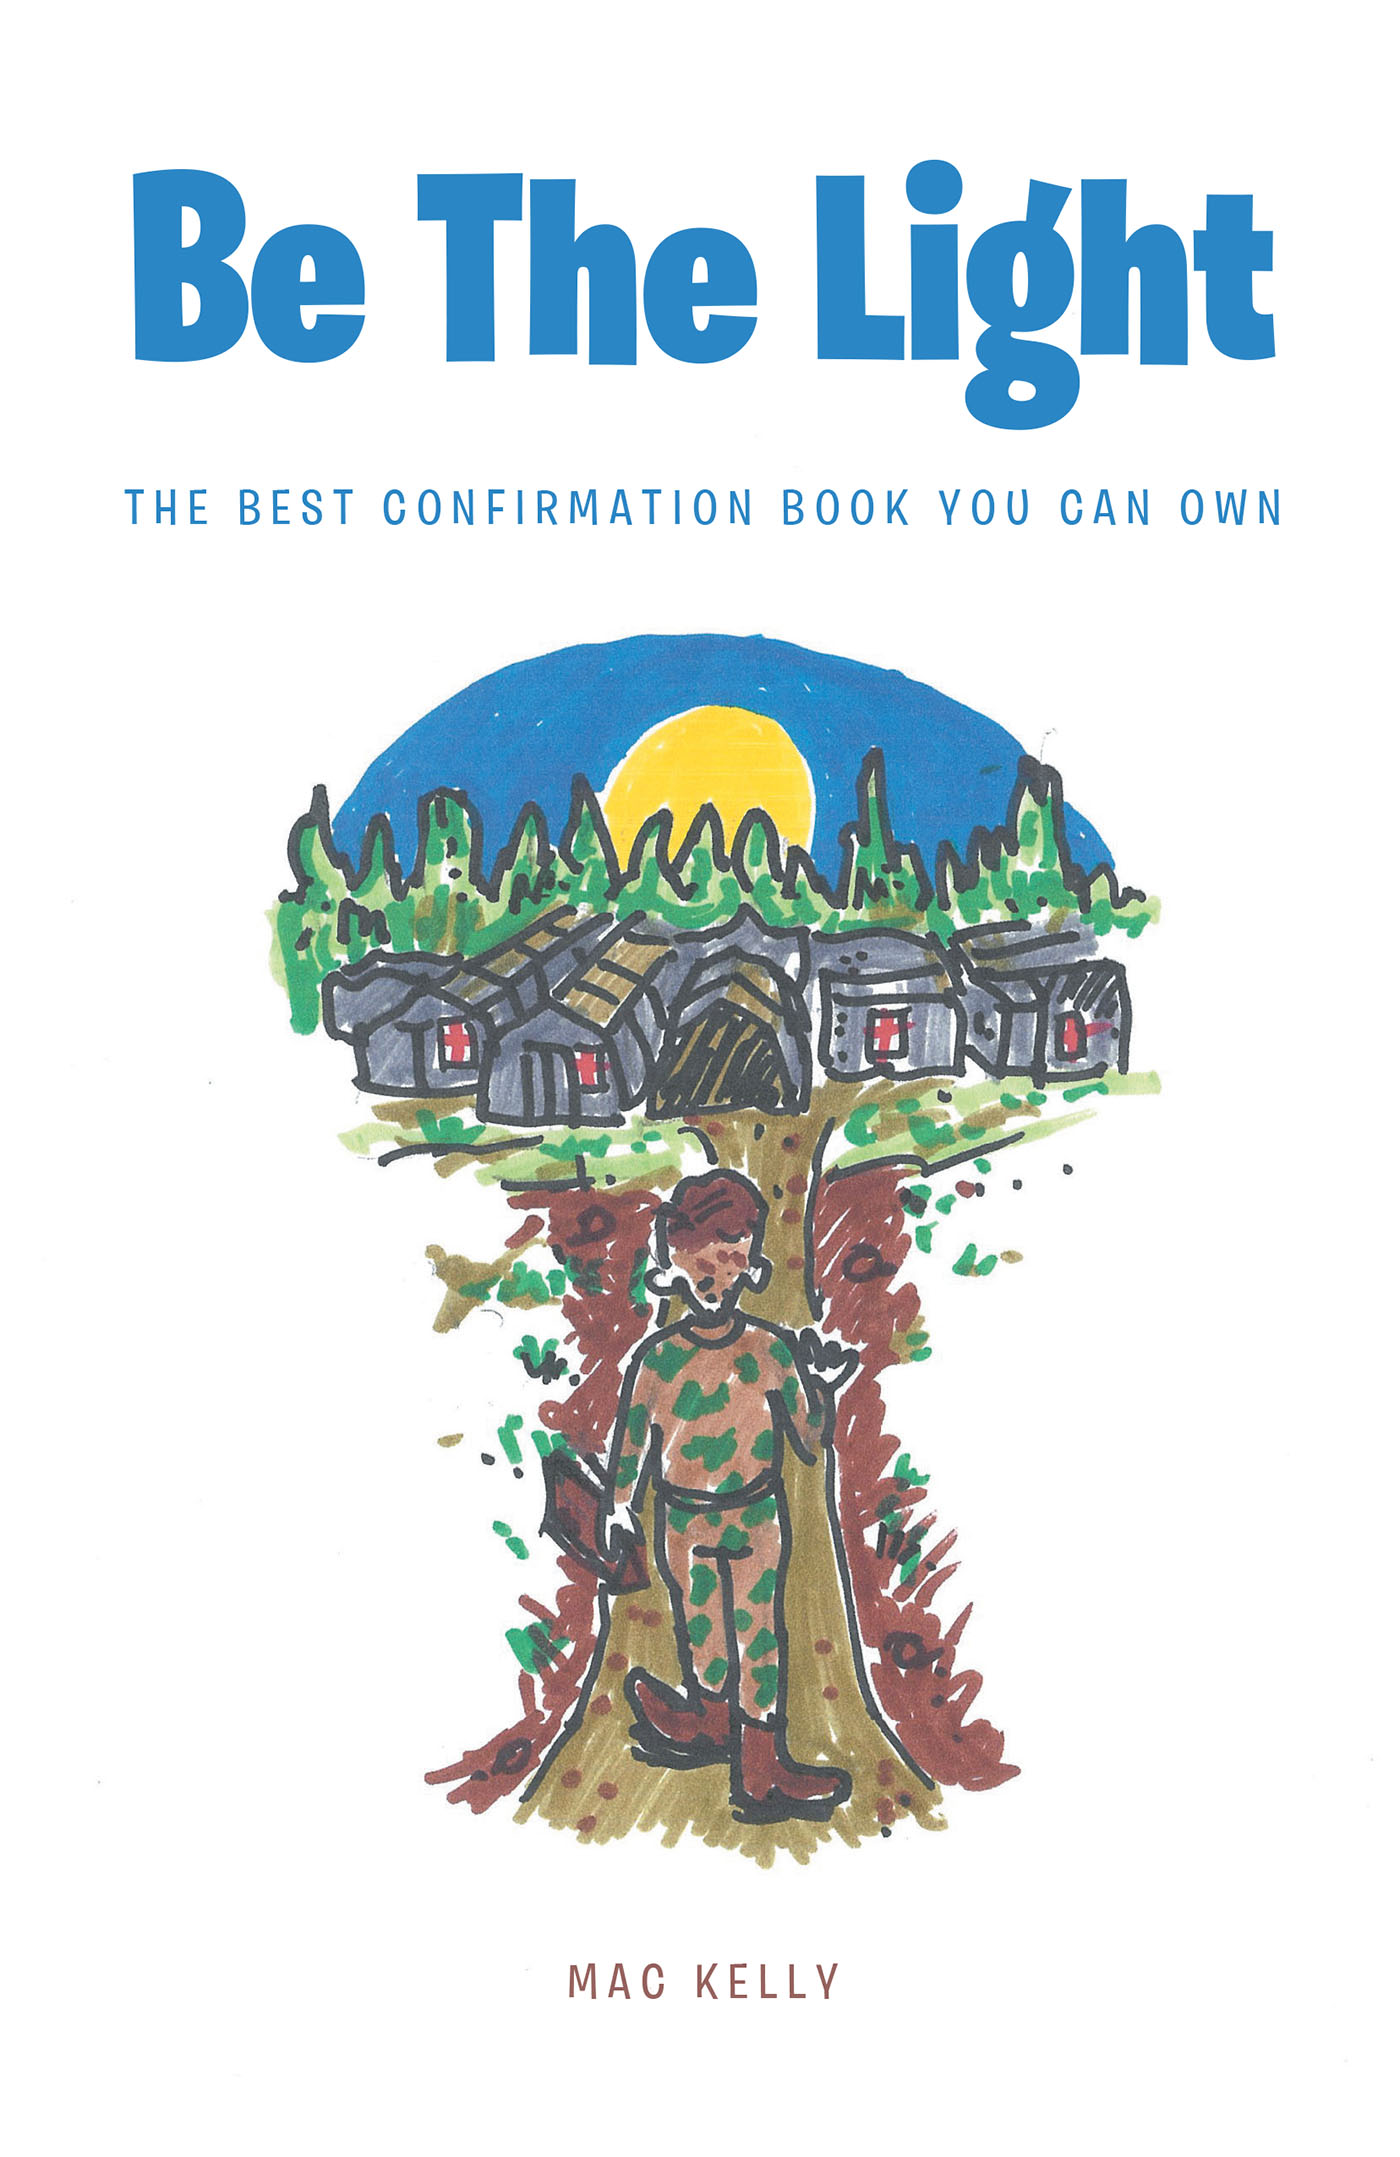 Mac Kelly’s Newly Released “Be The Light: The Best Confirmation Book You Can Own” is a Creative Narrative That Shares Two Key Lessons of Faith